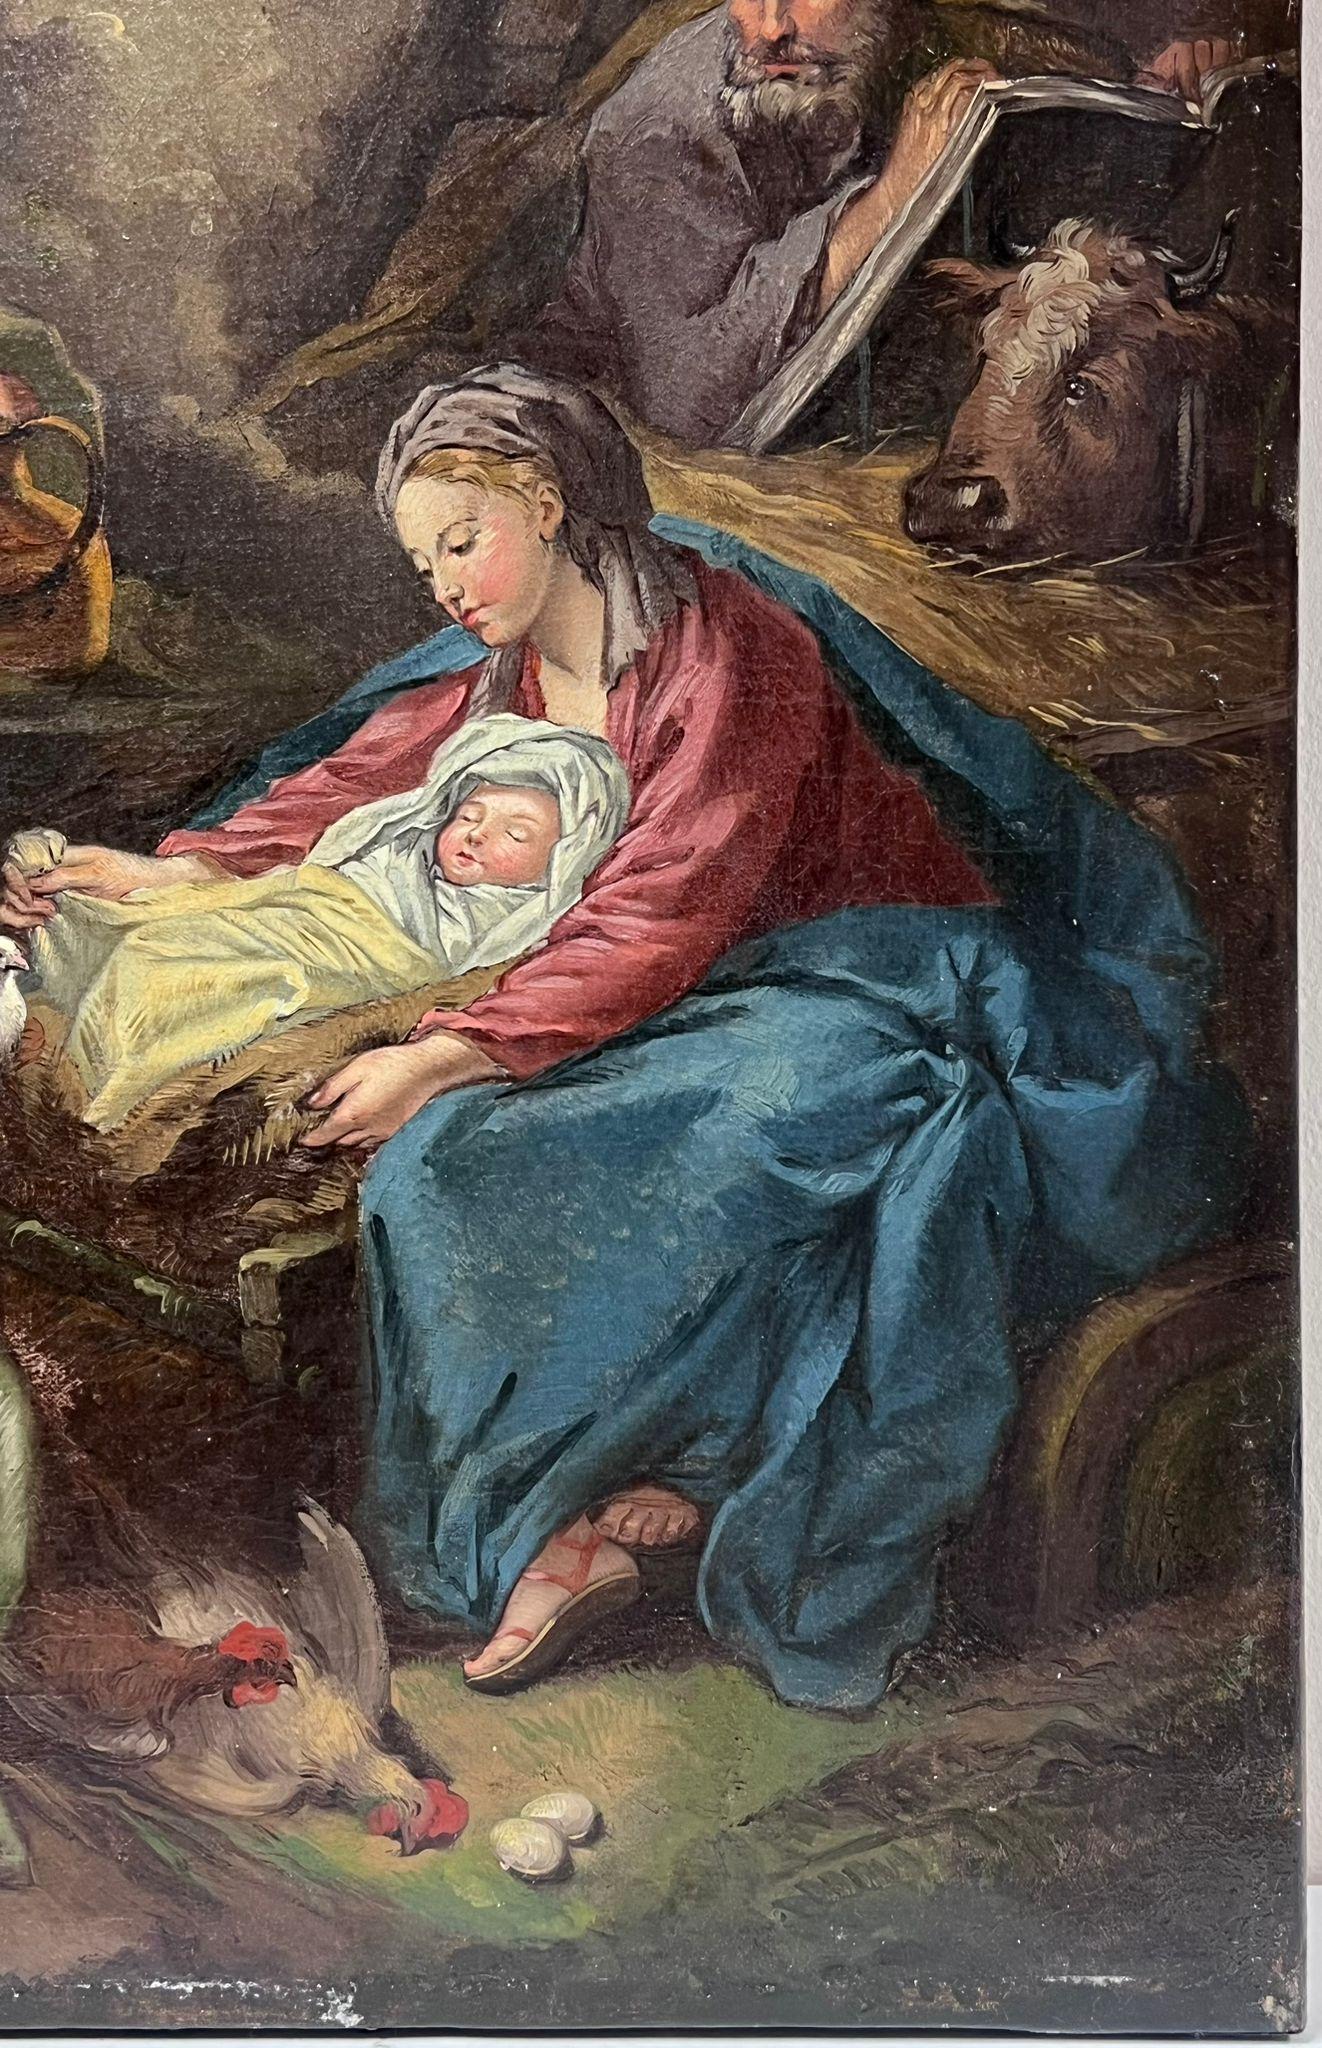 The Nativity
French School, 18th century
Rococo artist
oil on canvas, unframed
canvas : 22 x 17.5 inches
provenance: private collection, Normandy, France
condition: very good and sound condition 